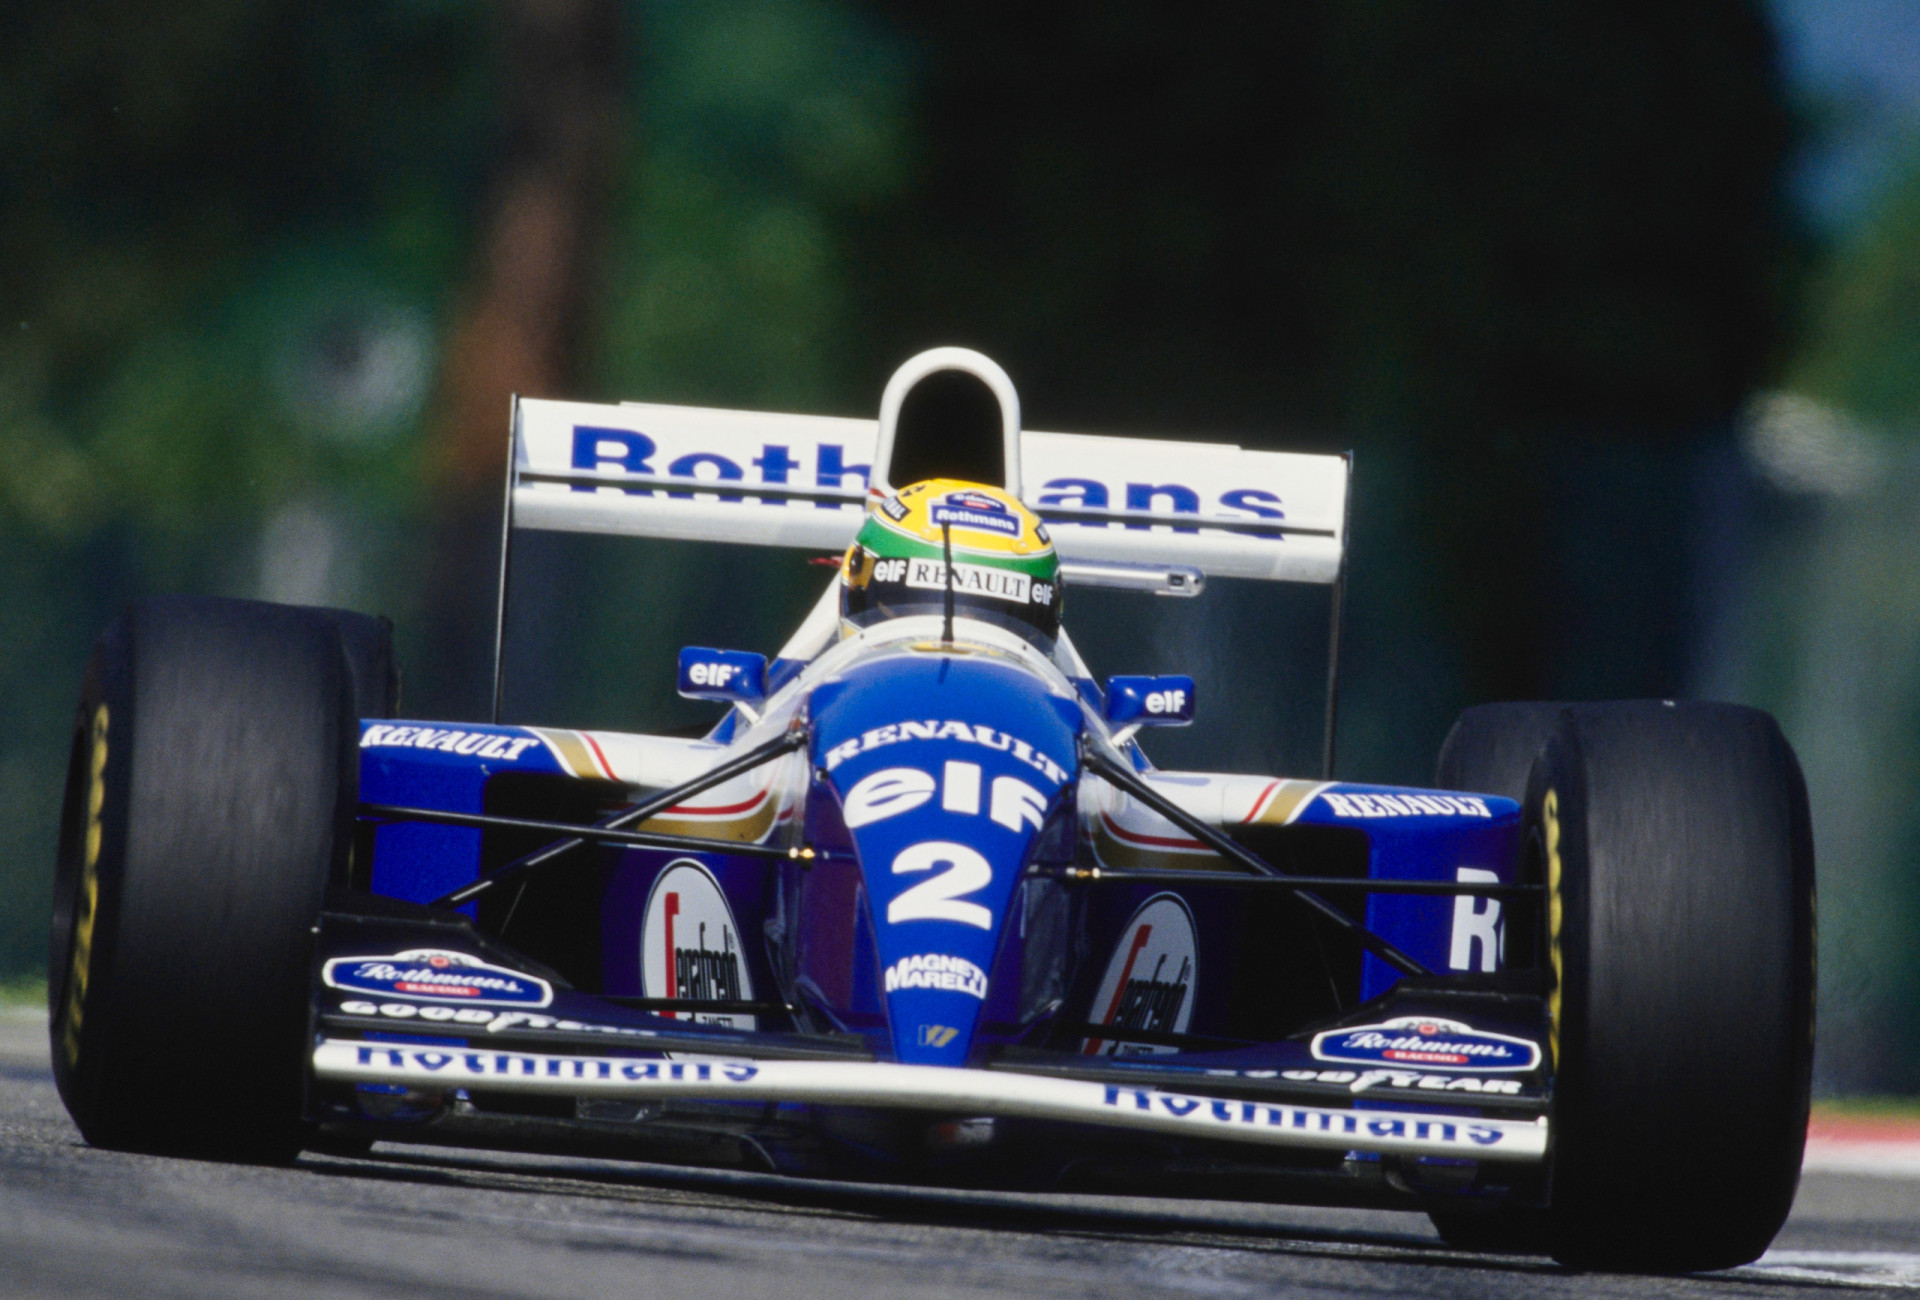 <p>On the eve of the race at Imola, Senna reported, "My car reacts a bit nervously on this kind of surface. It stems from the special aerodynamics but it's also got to do with a difficulty in the suspension." Then after being advised to withdraw from the race after Roland Ratzenberger's fatal crash during qualifying, he said: "There are certain things over which we have no control. I cannot quit. I have to go on."</p>